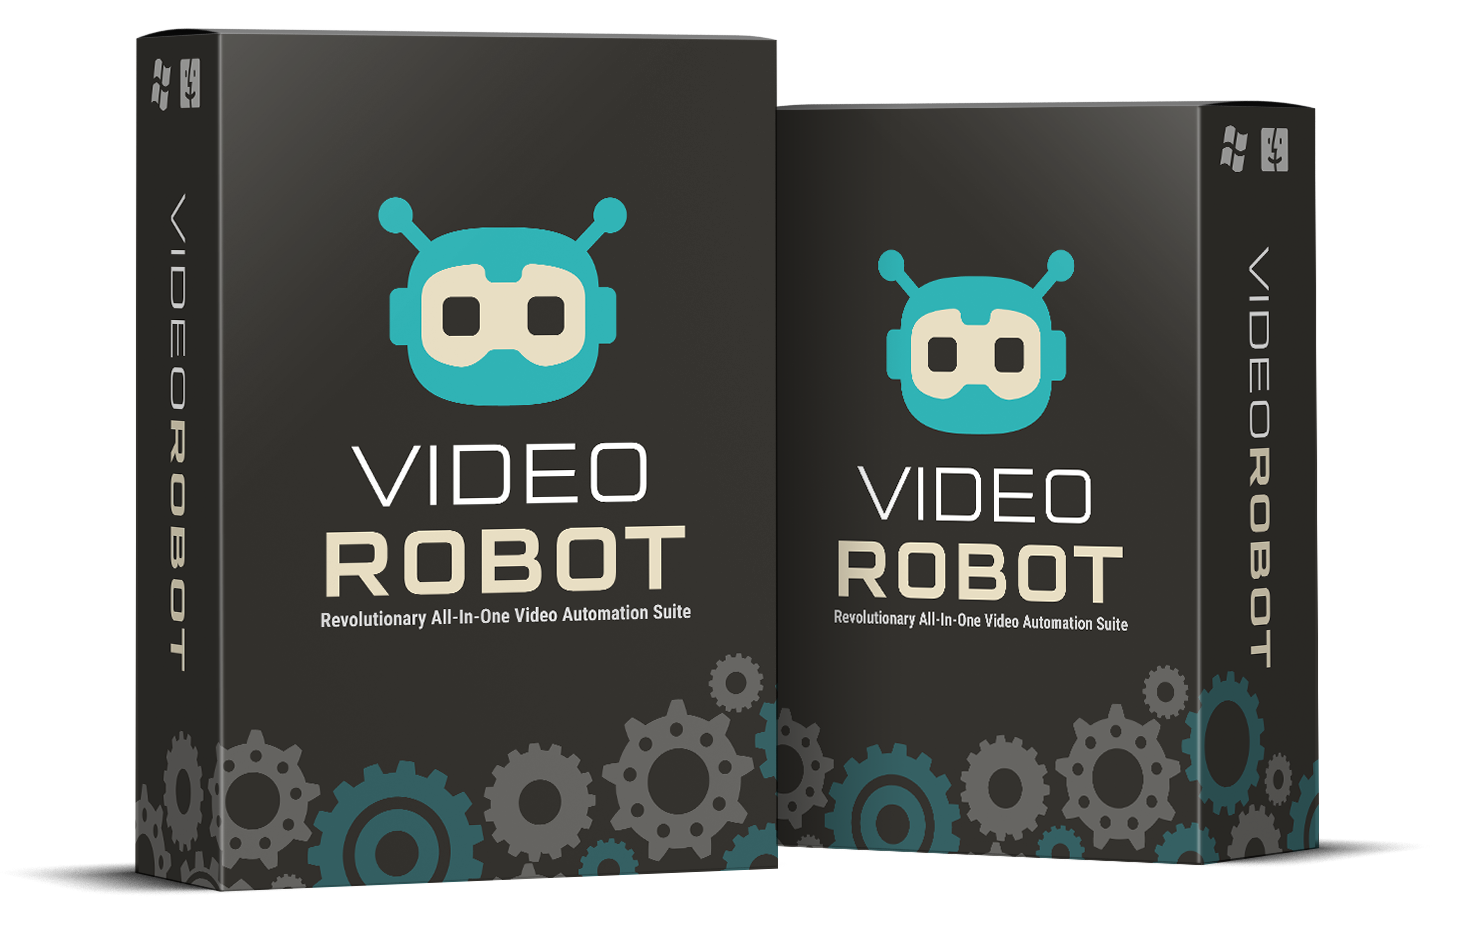 The Future Of Videos - the All New 'Next Generation' Video Robot